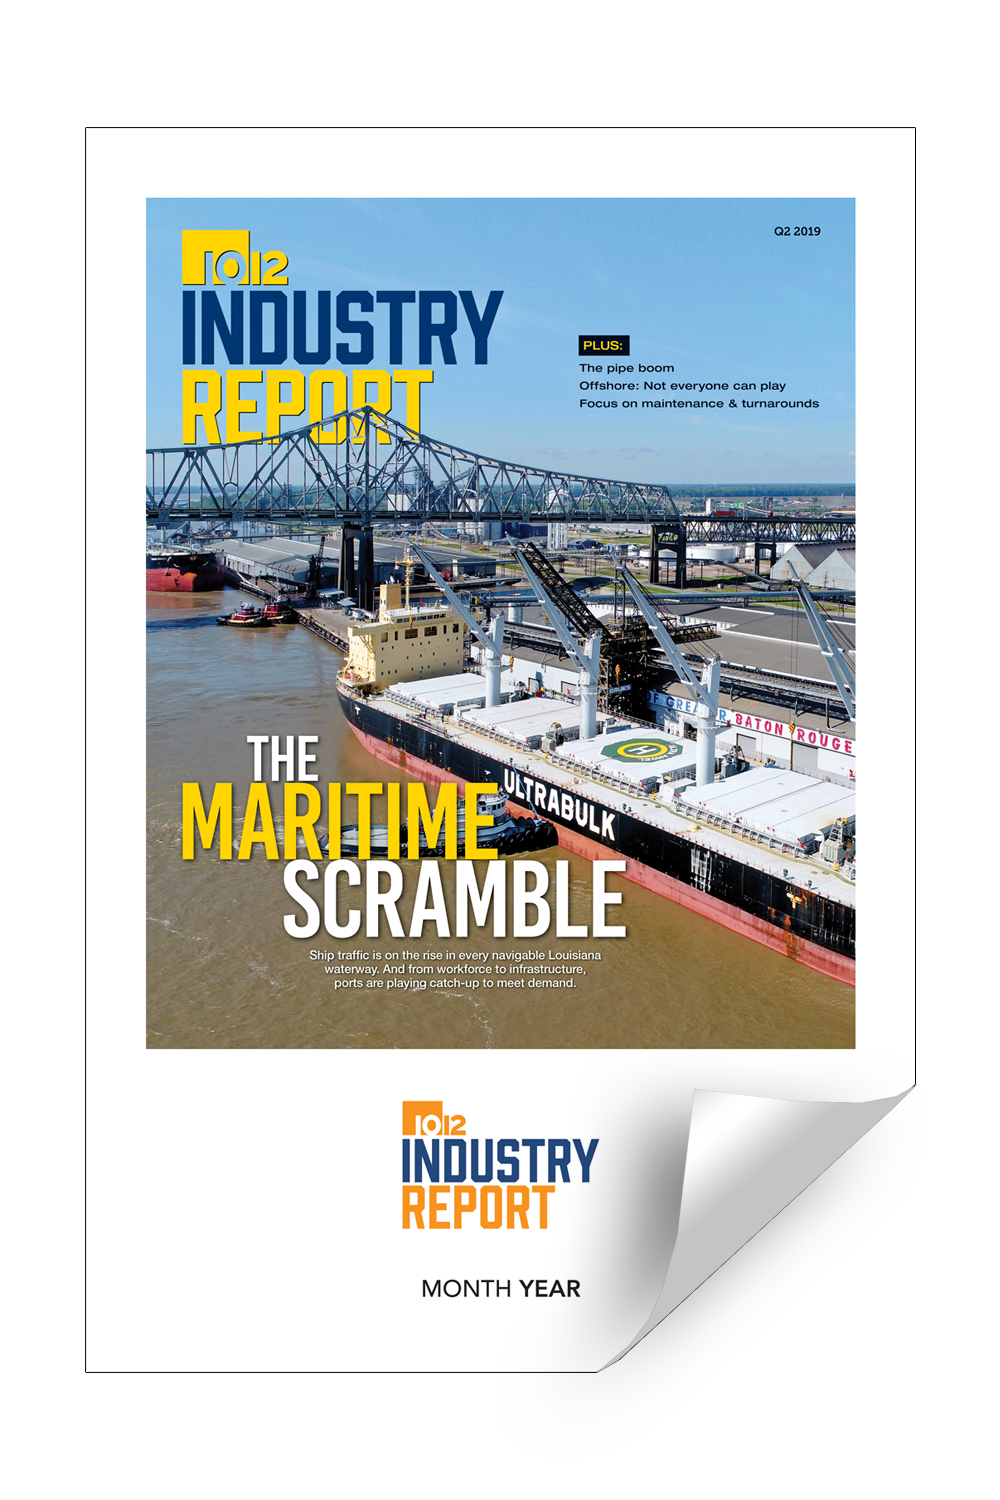 10/12 Industry Report Cover / Article Reprints by NewsKeepsake